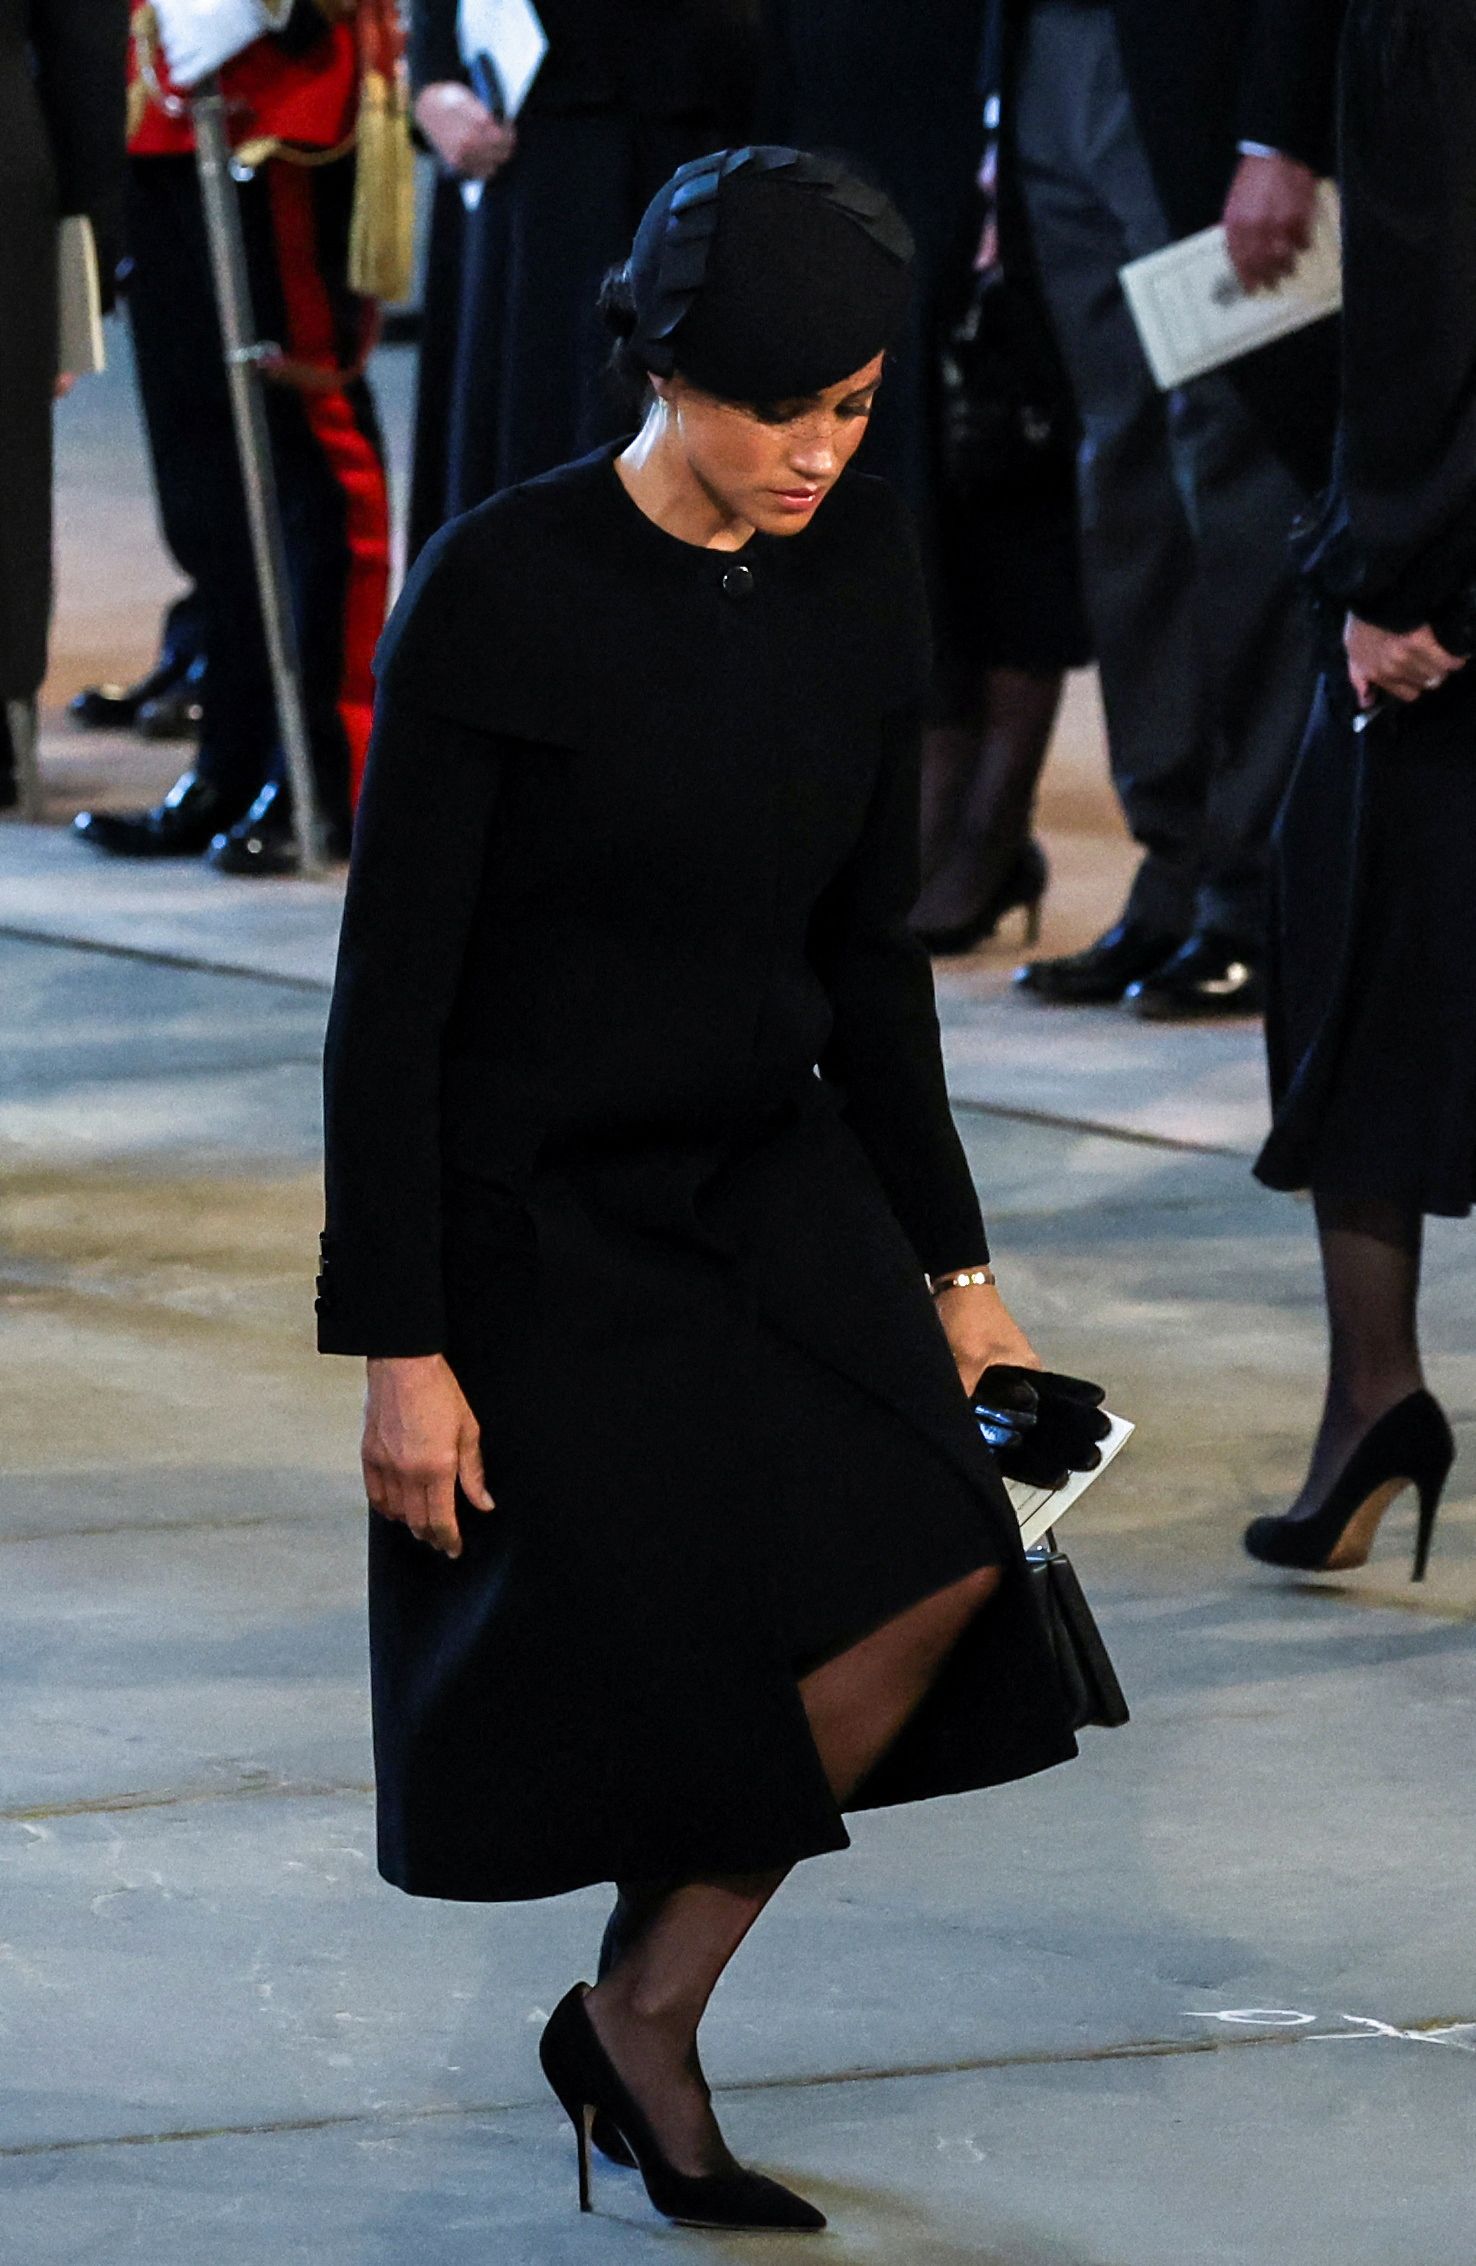 Meghan in Head to Toe Dior Haute Couture for Platinum Jubilee